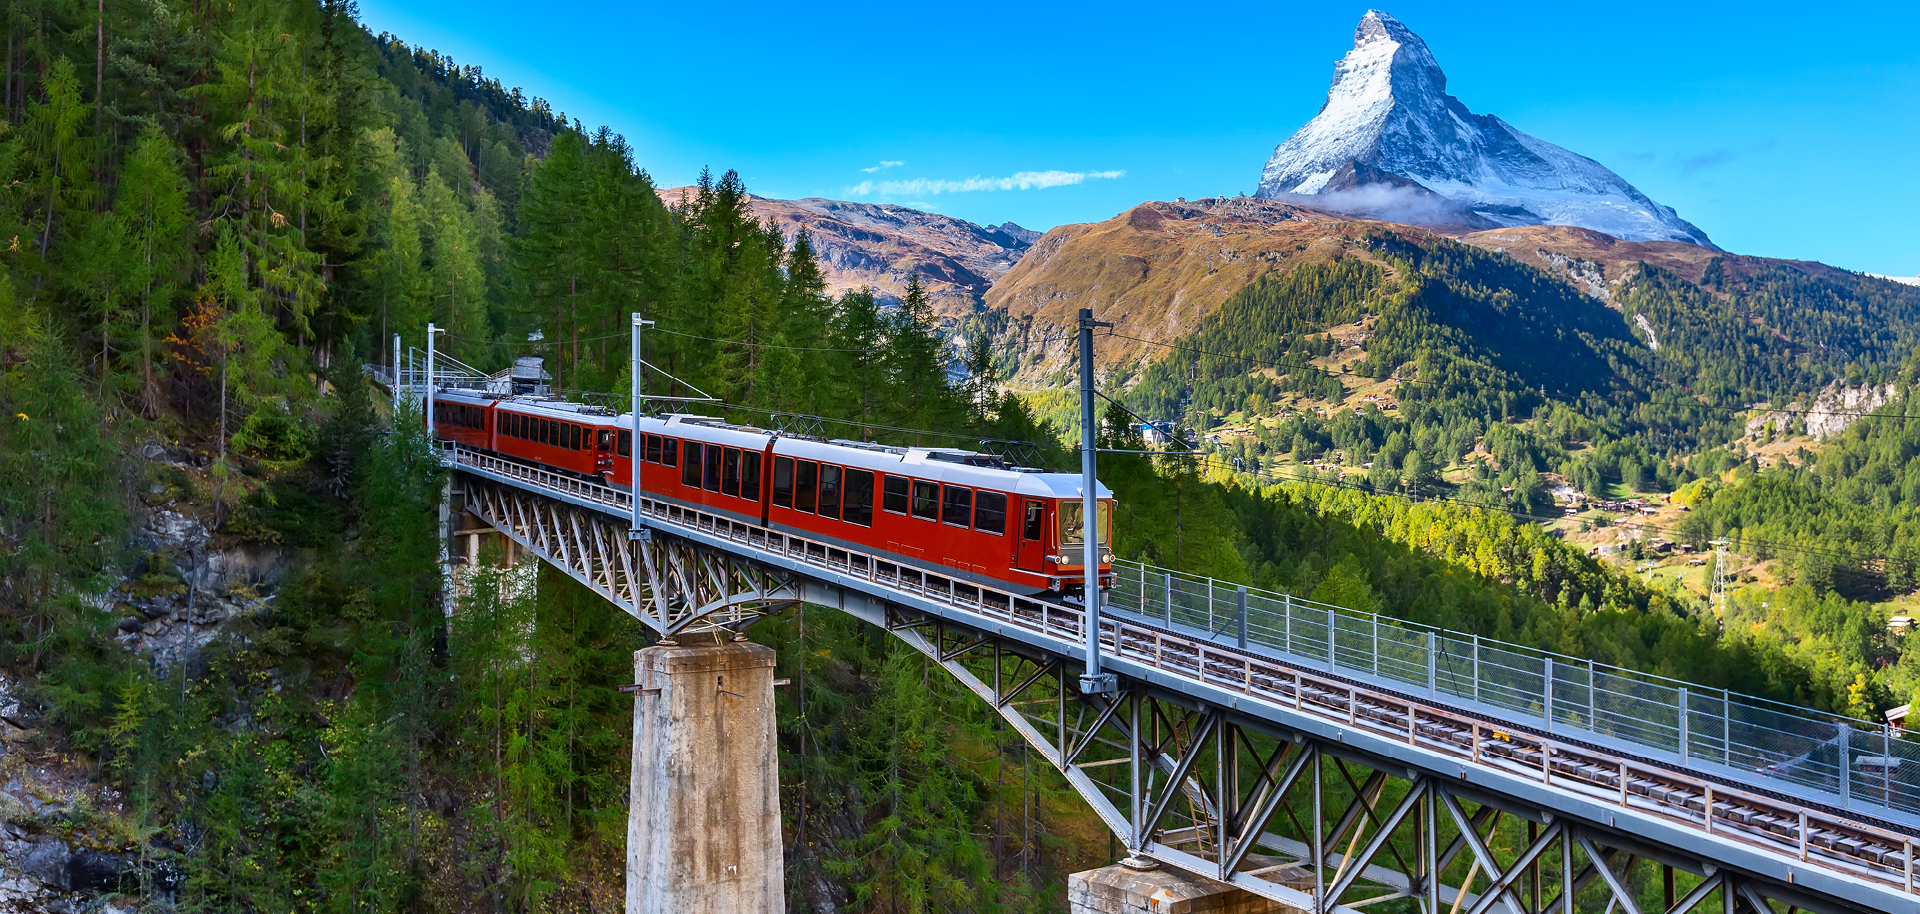 The Swiss Alpine Express travelling across a birdge during a rail